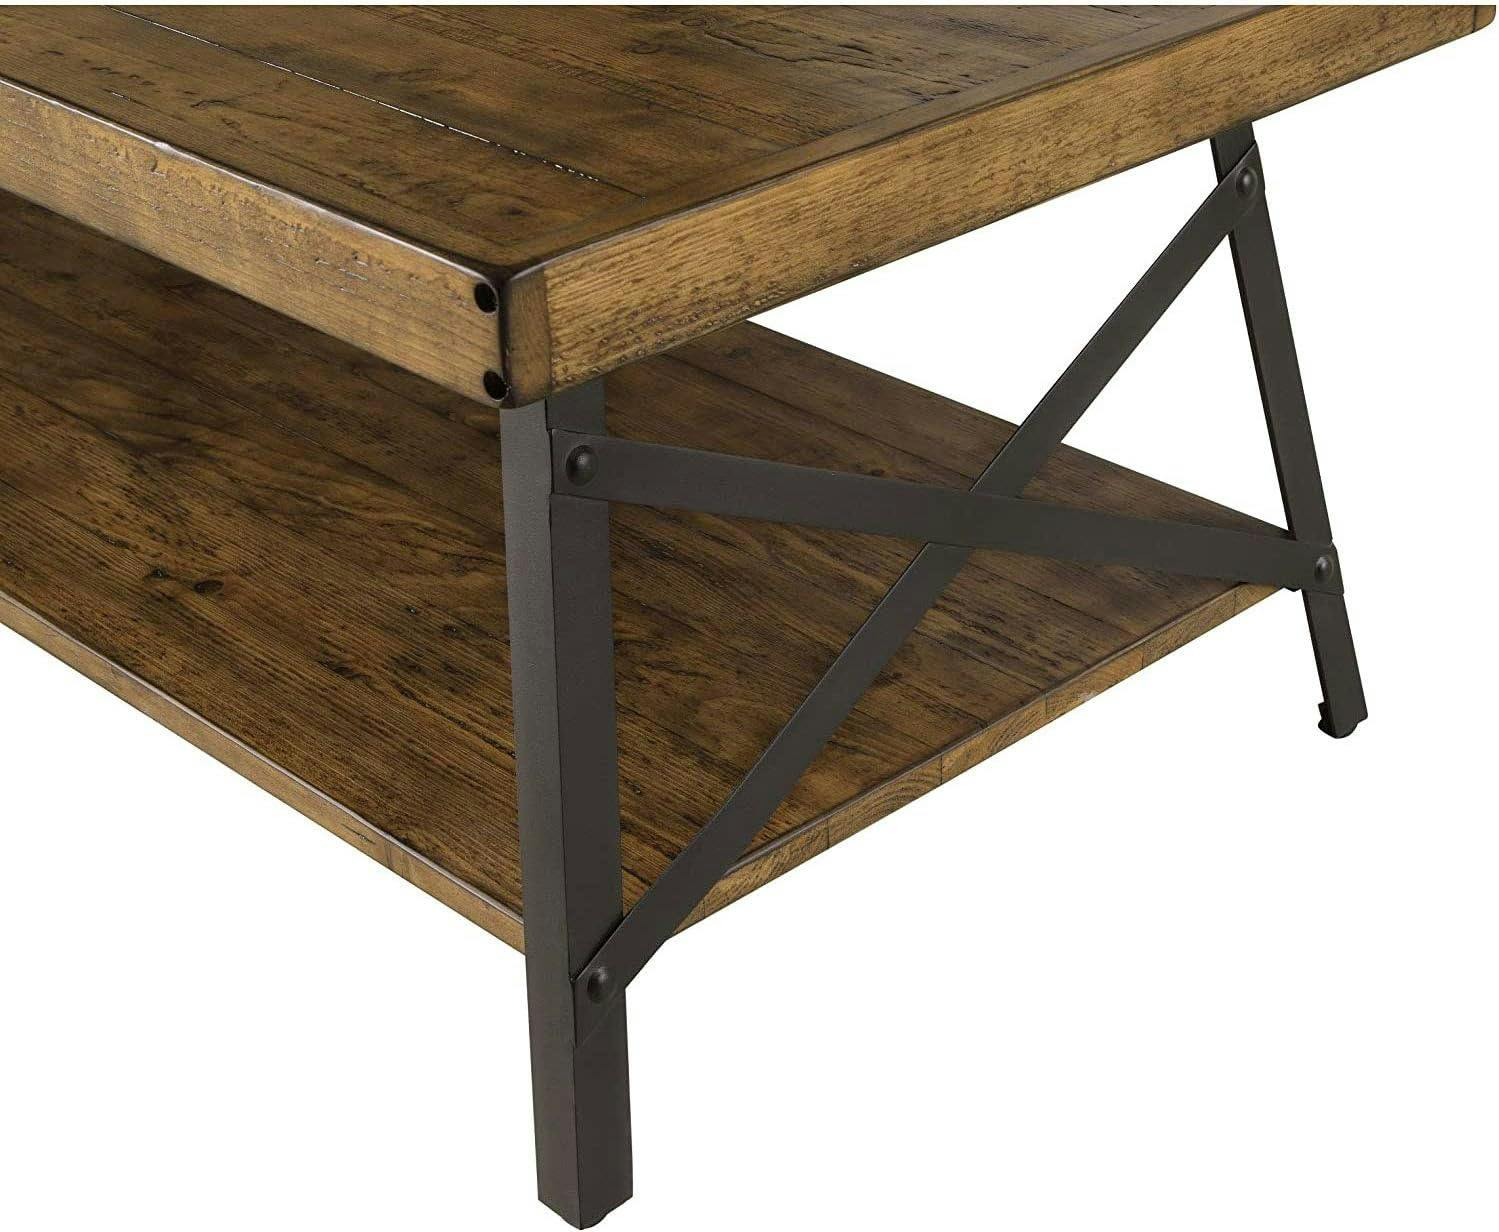 Chandler Pine Brown Solid Wood & Steel Coffee Table with Shelf